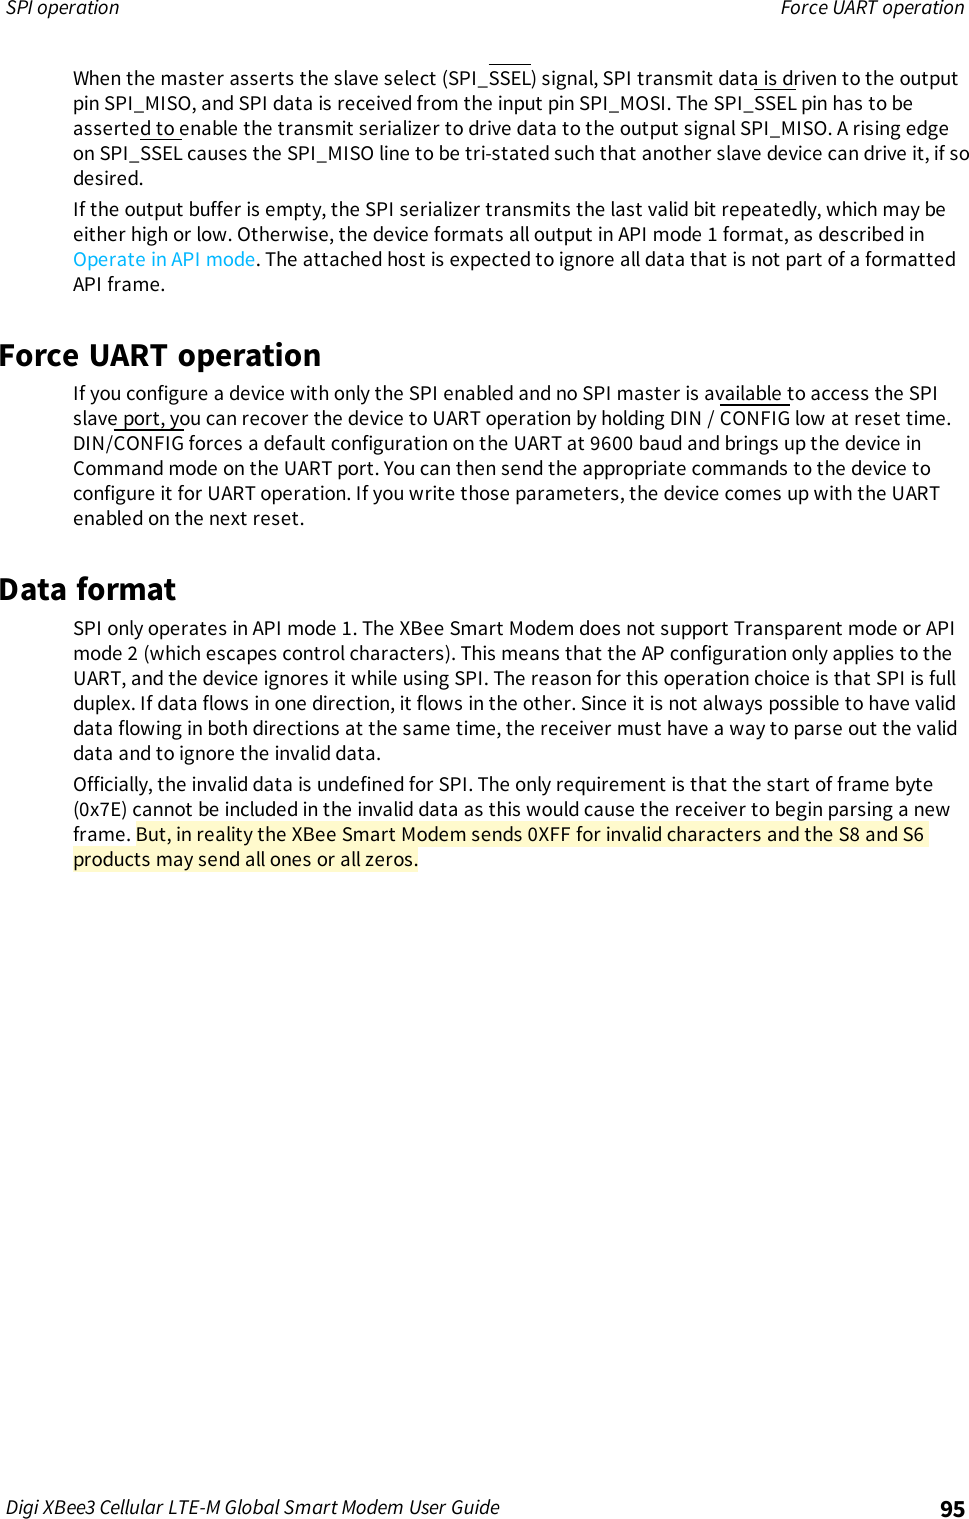 Page 95 of Digi XB3M1 XBee3 Cellular LTE-M User Manual 